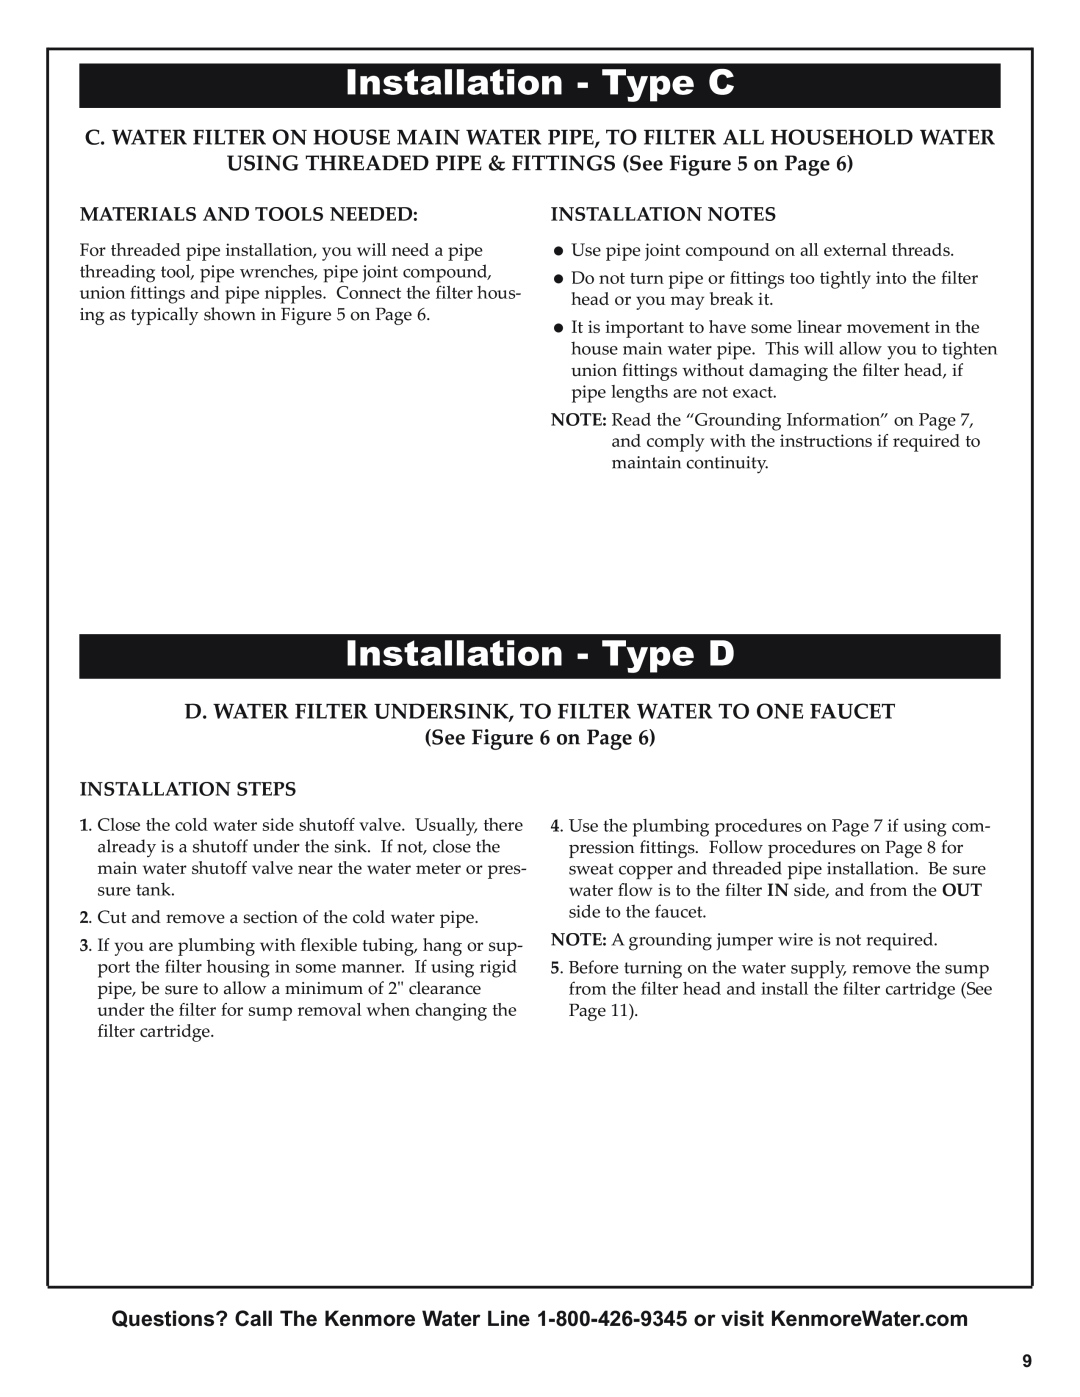 Kenmore 625.38445 owner manual Installation - Type C, Installation - Type D, USING THREADED PIPE & FITTINGS See on Page 